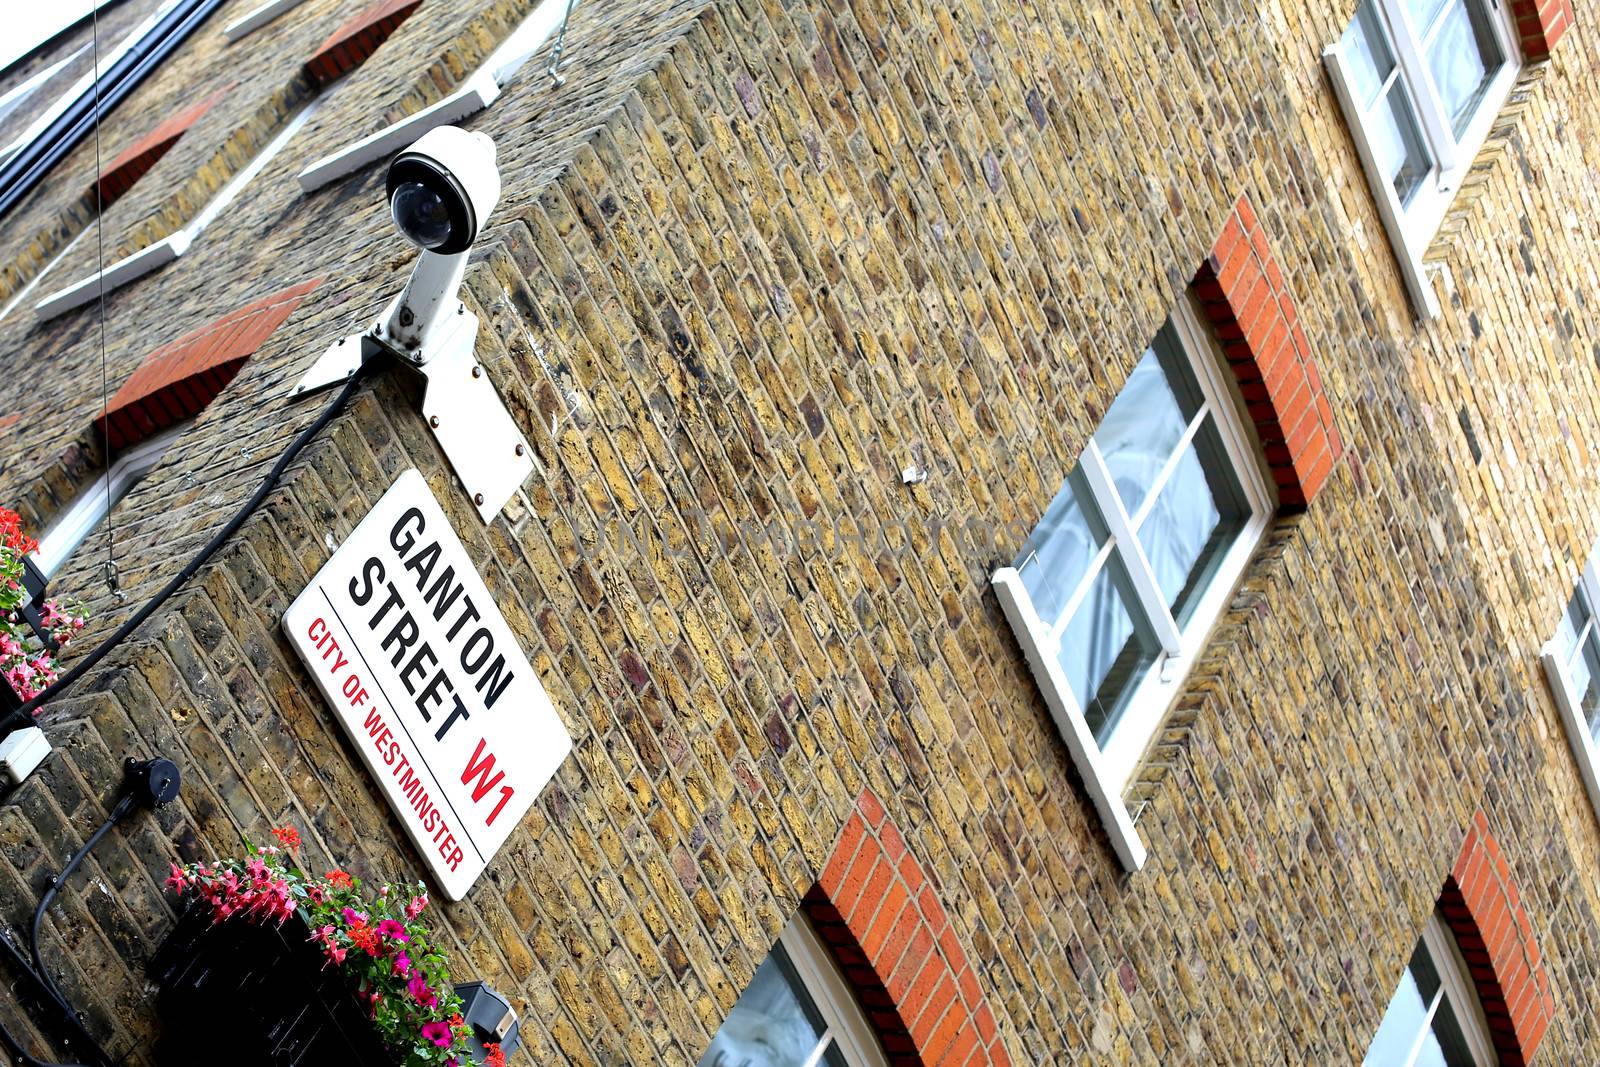 Canton Street Road Sign London W1 by Whiteboxmedia